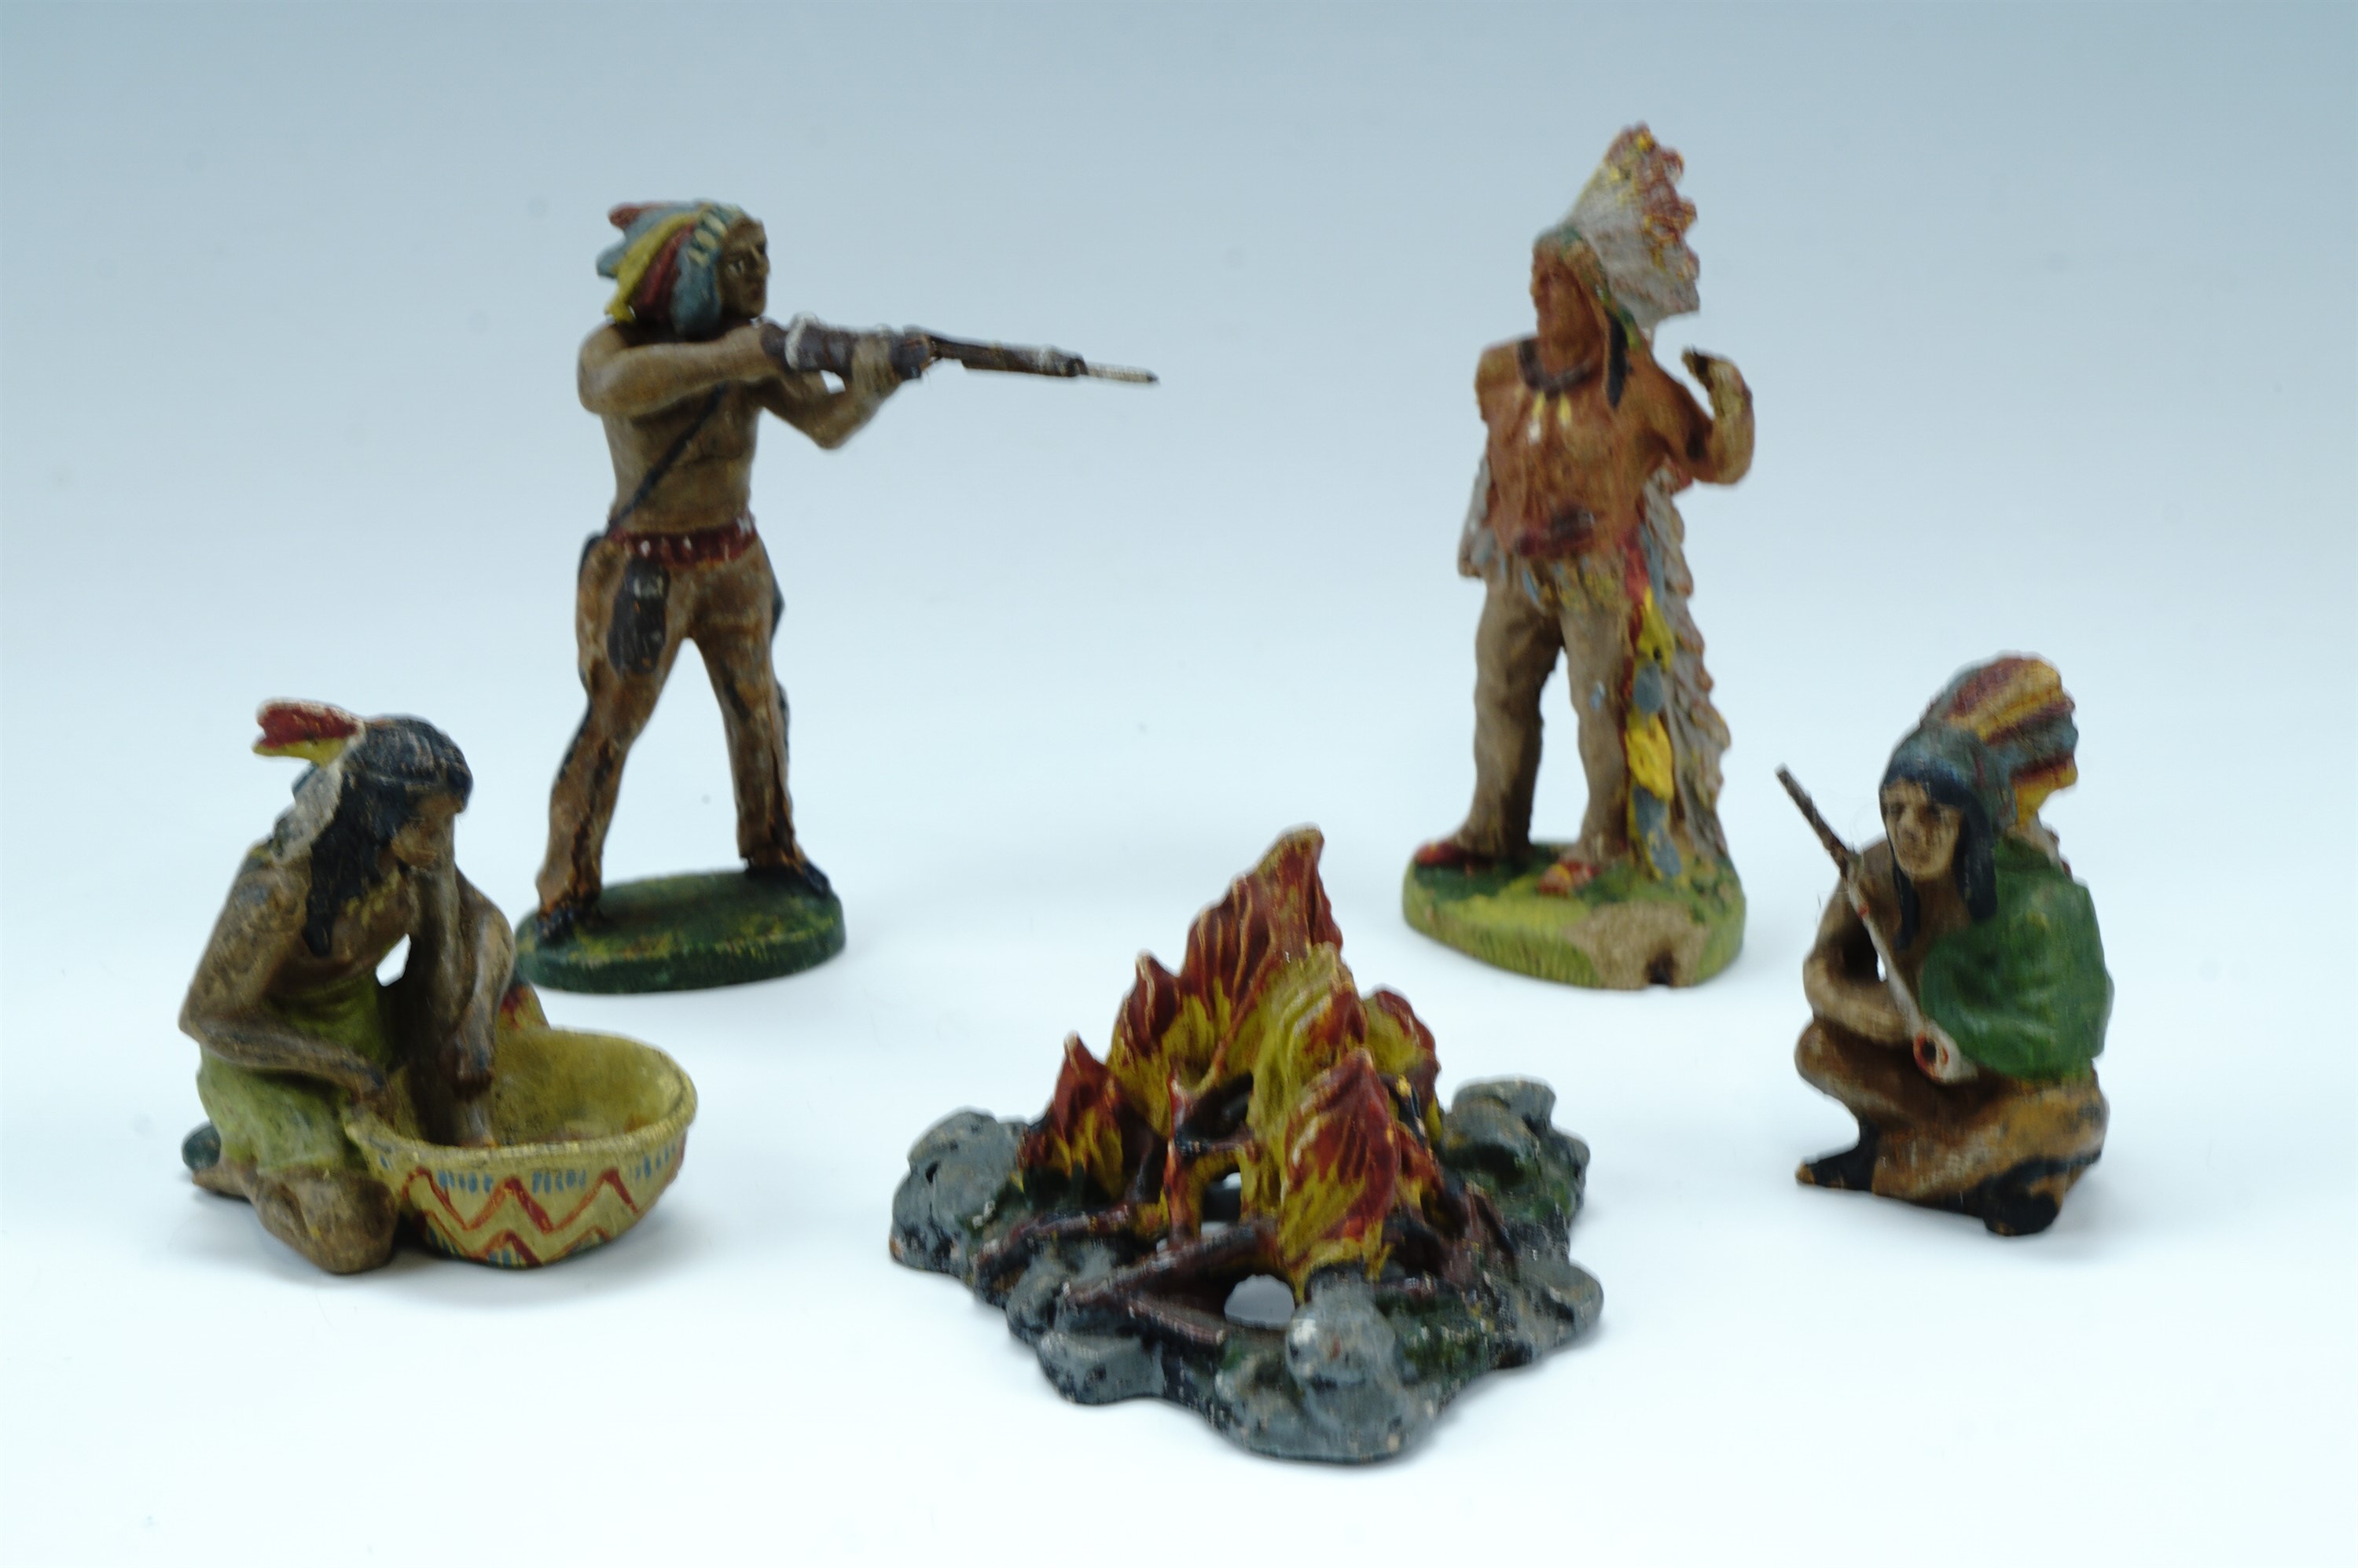 Elastolin Native American toy "soldiers"